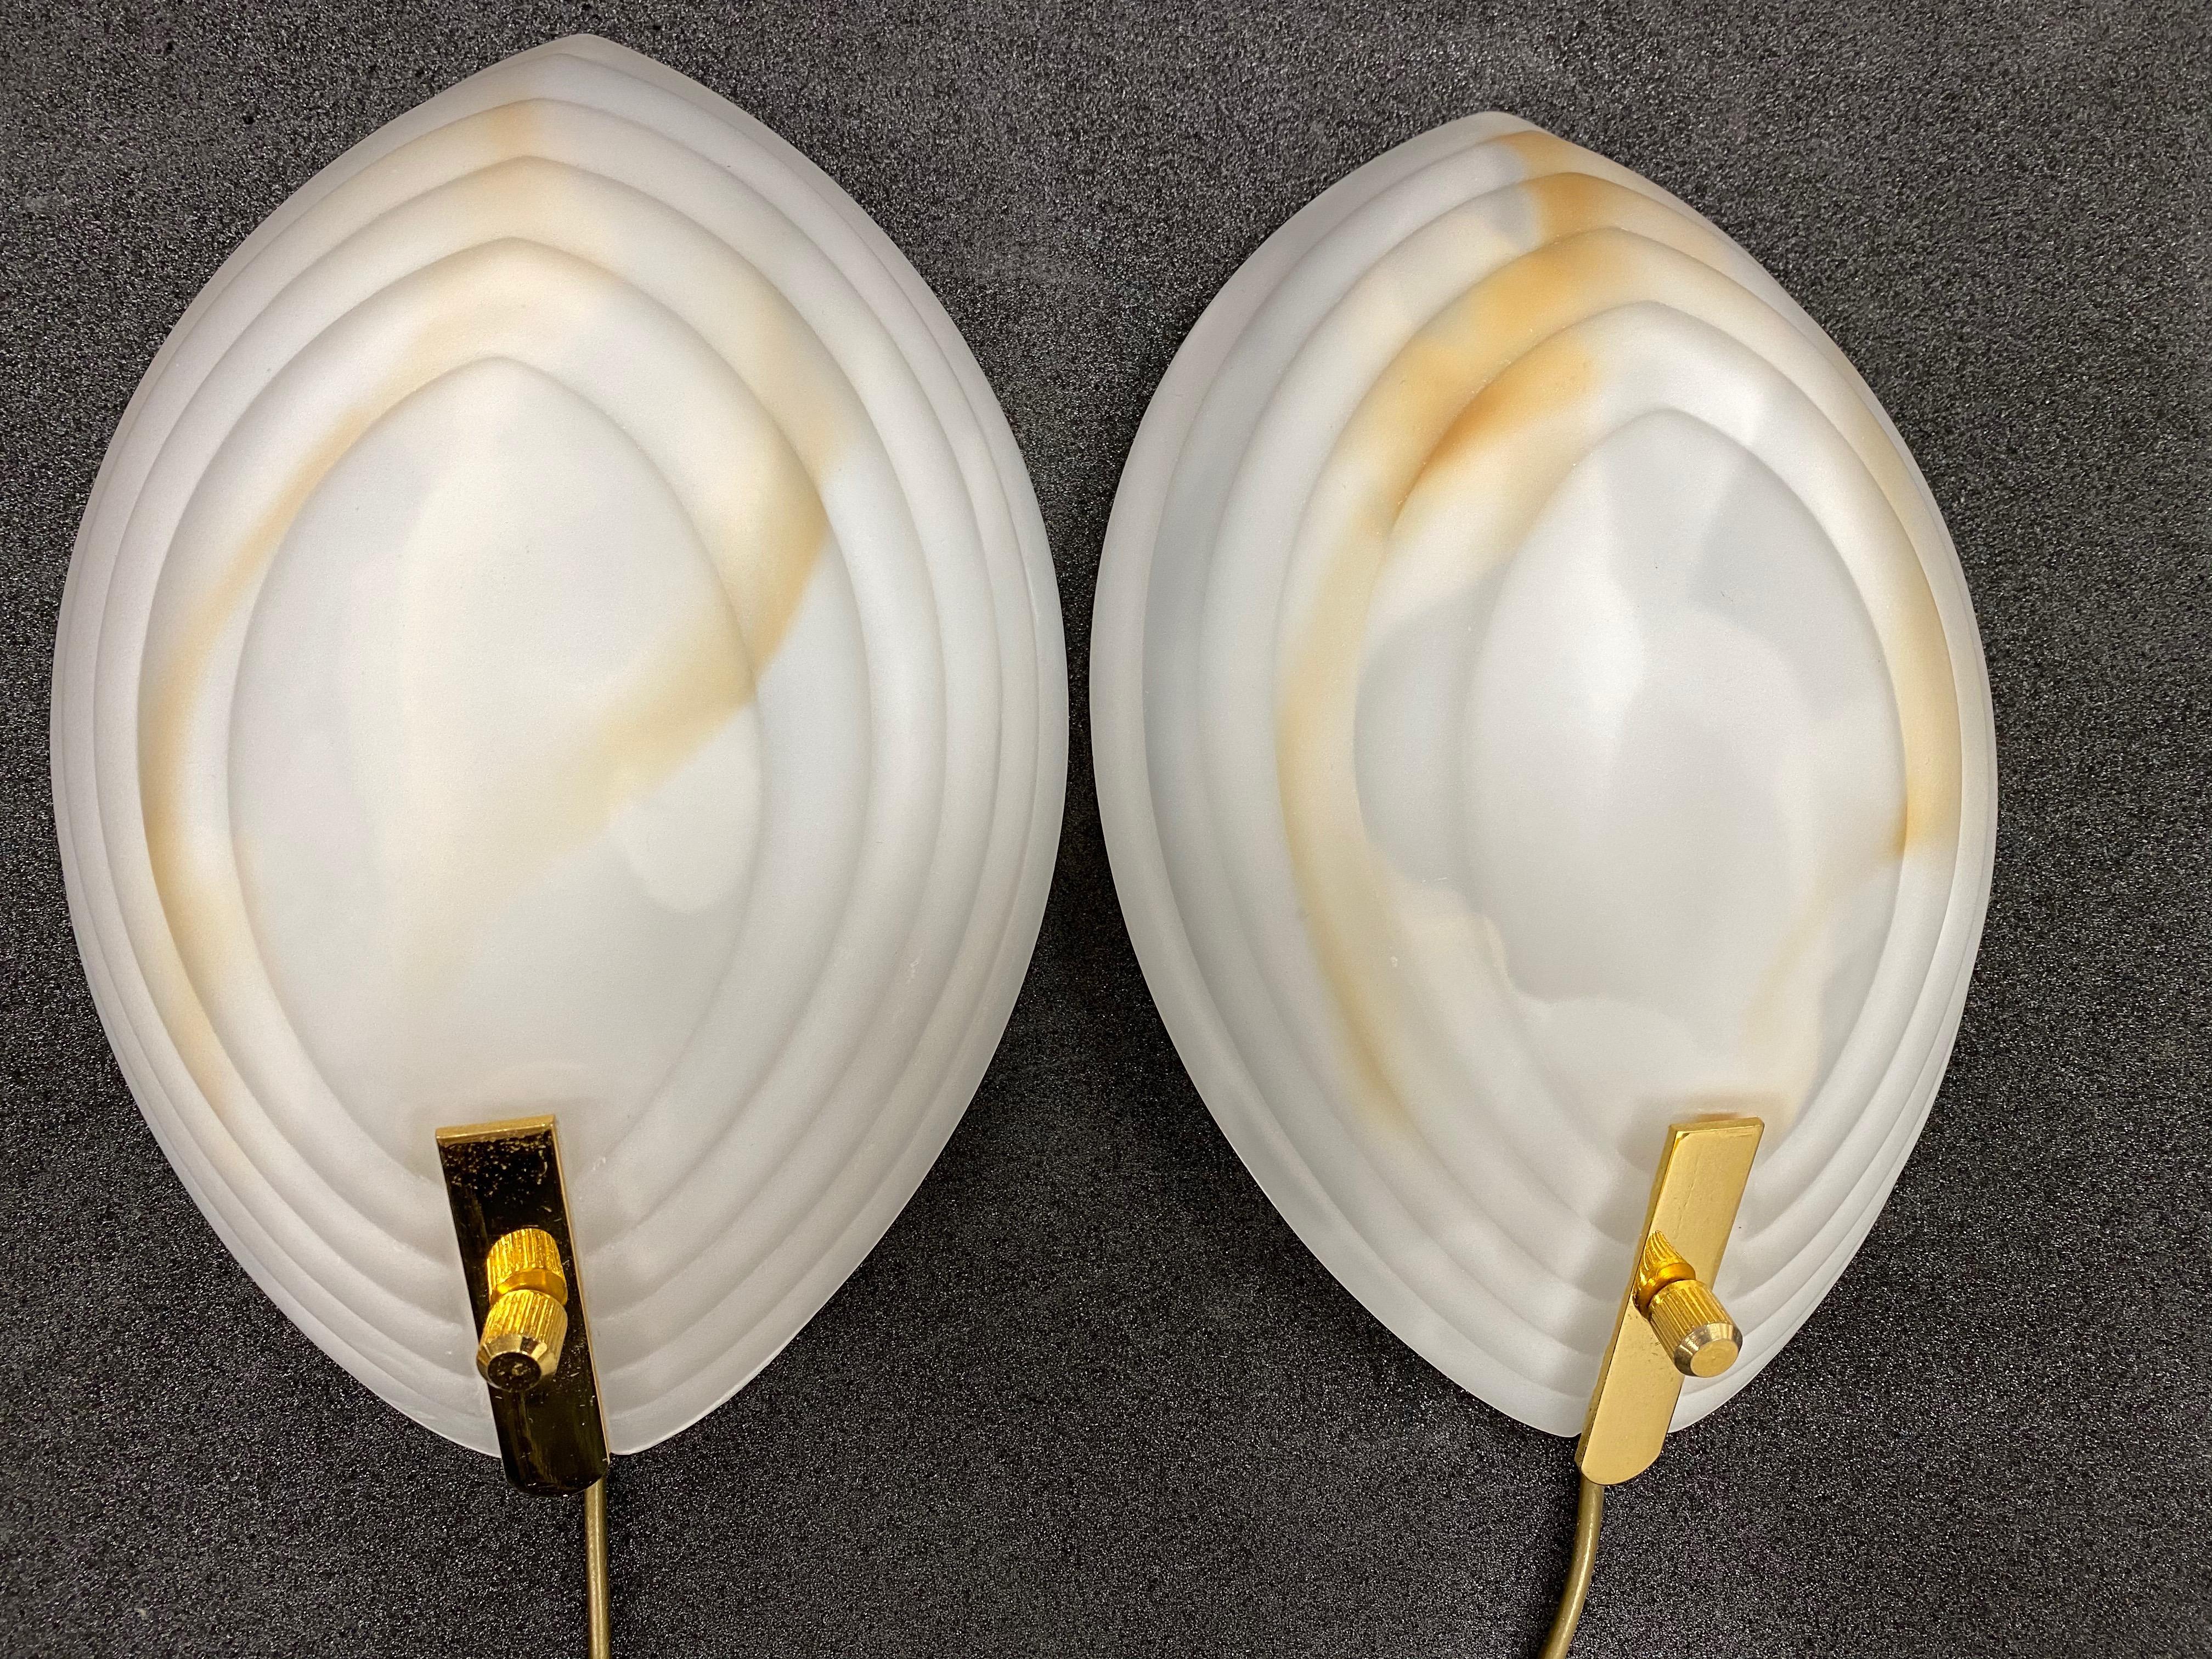 Stunning pair of ribbed shaped wall lights in a high quality warm blown Murano glass. The glass bodies acquire a lovely marble tone when lit and unlit. They have white lacquered fittings and gold-plated little bars to hold the glass. Ideal for a